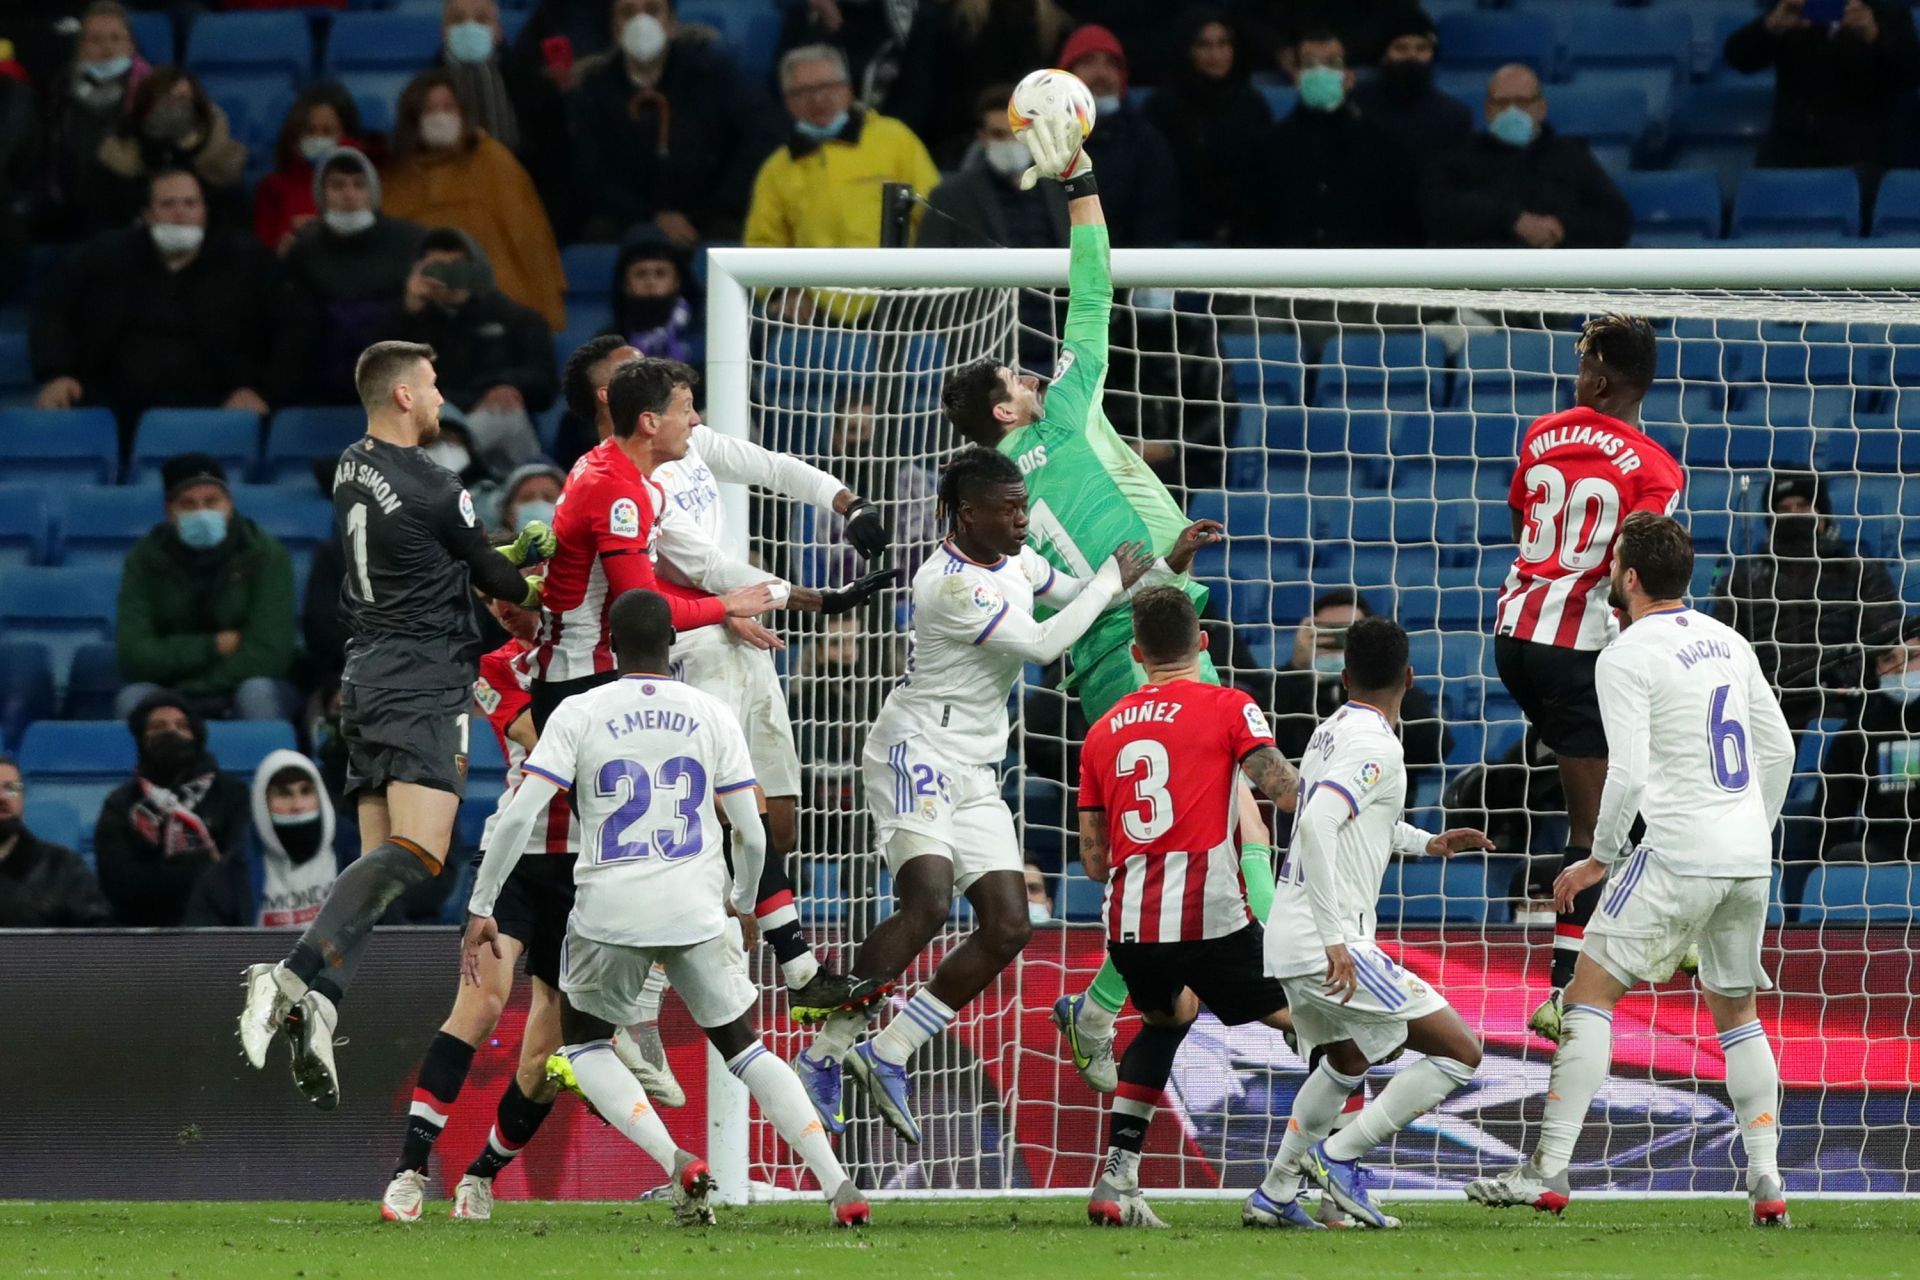 Thibaut Courtois diverts the ball away from goal.